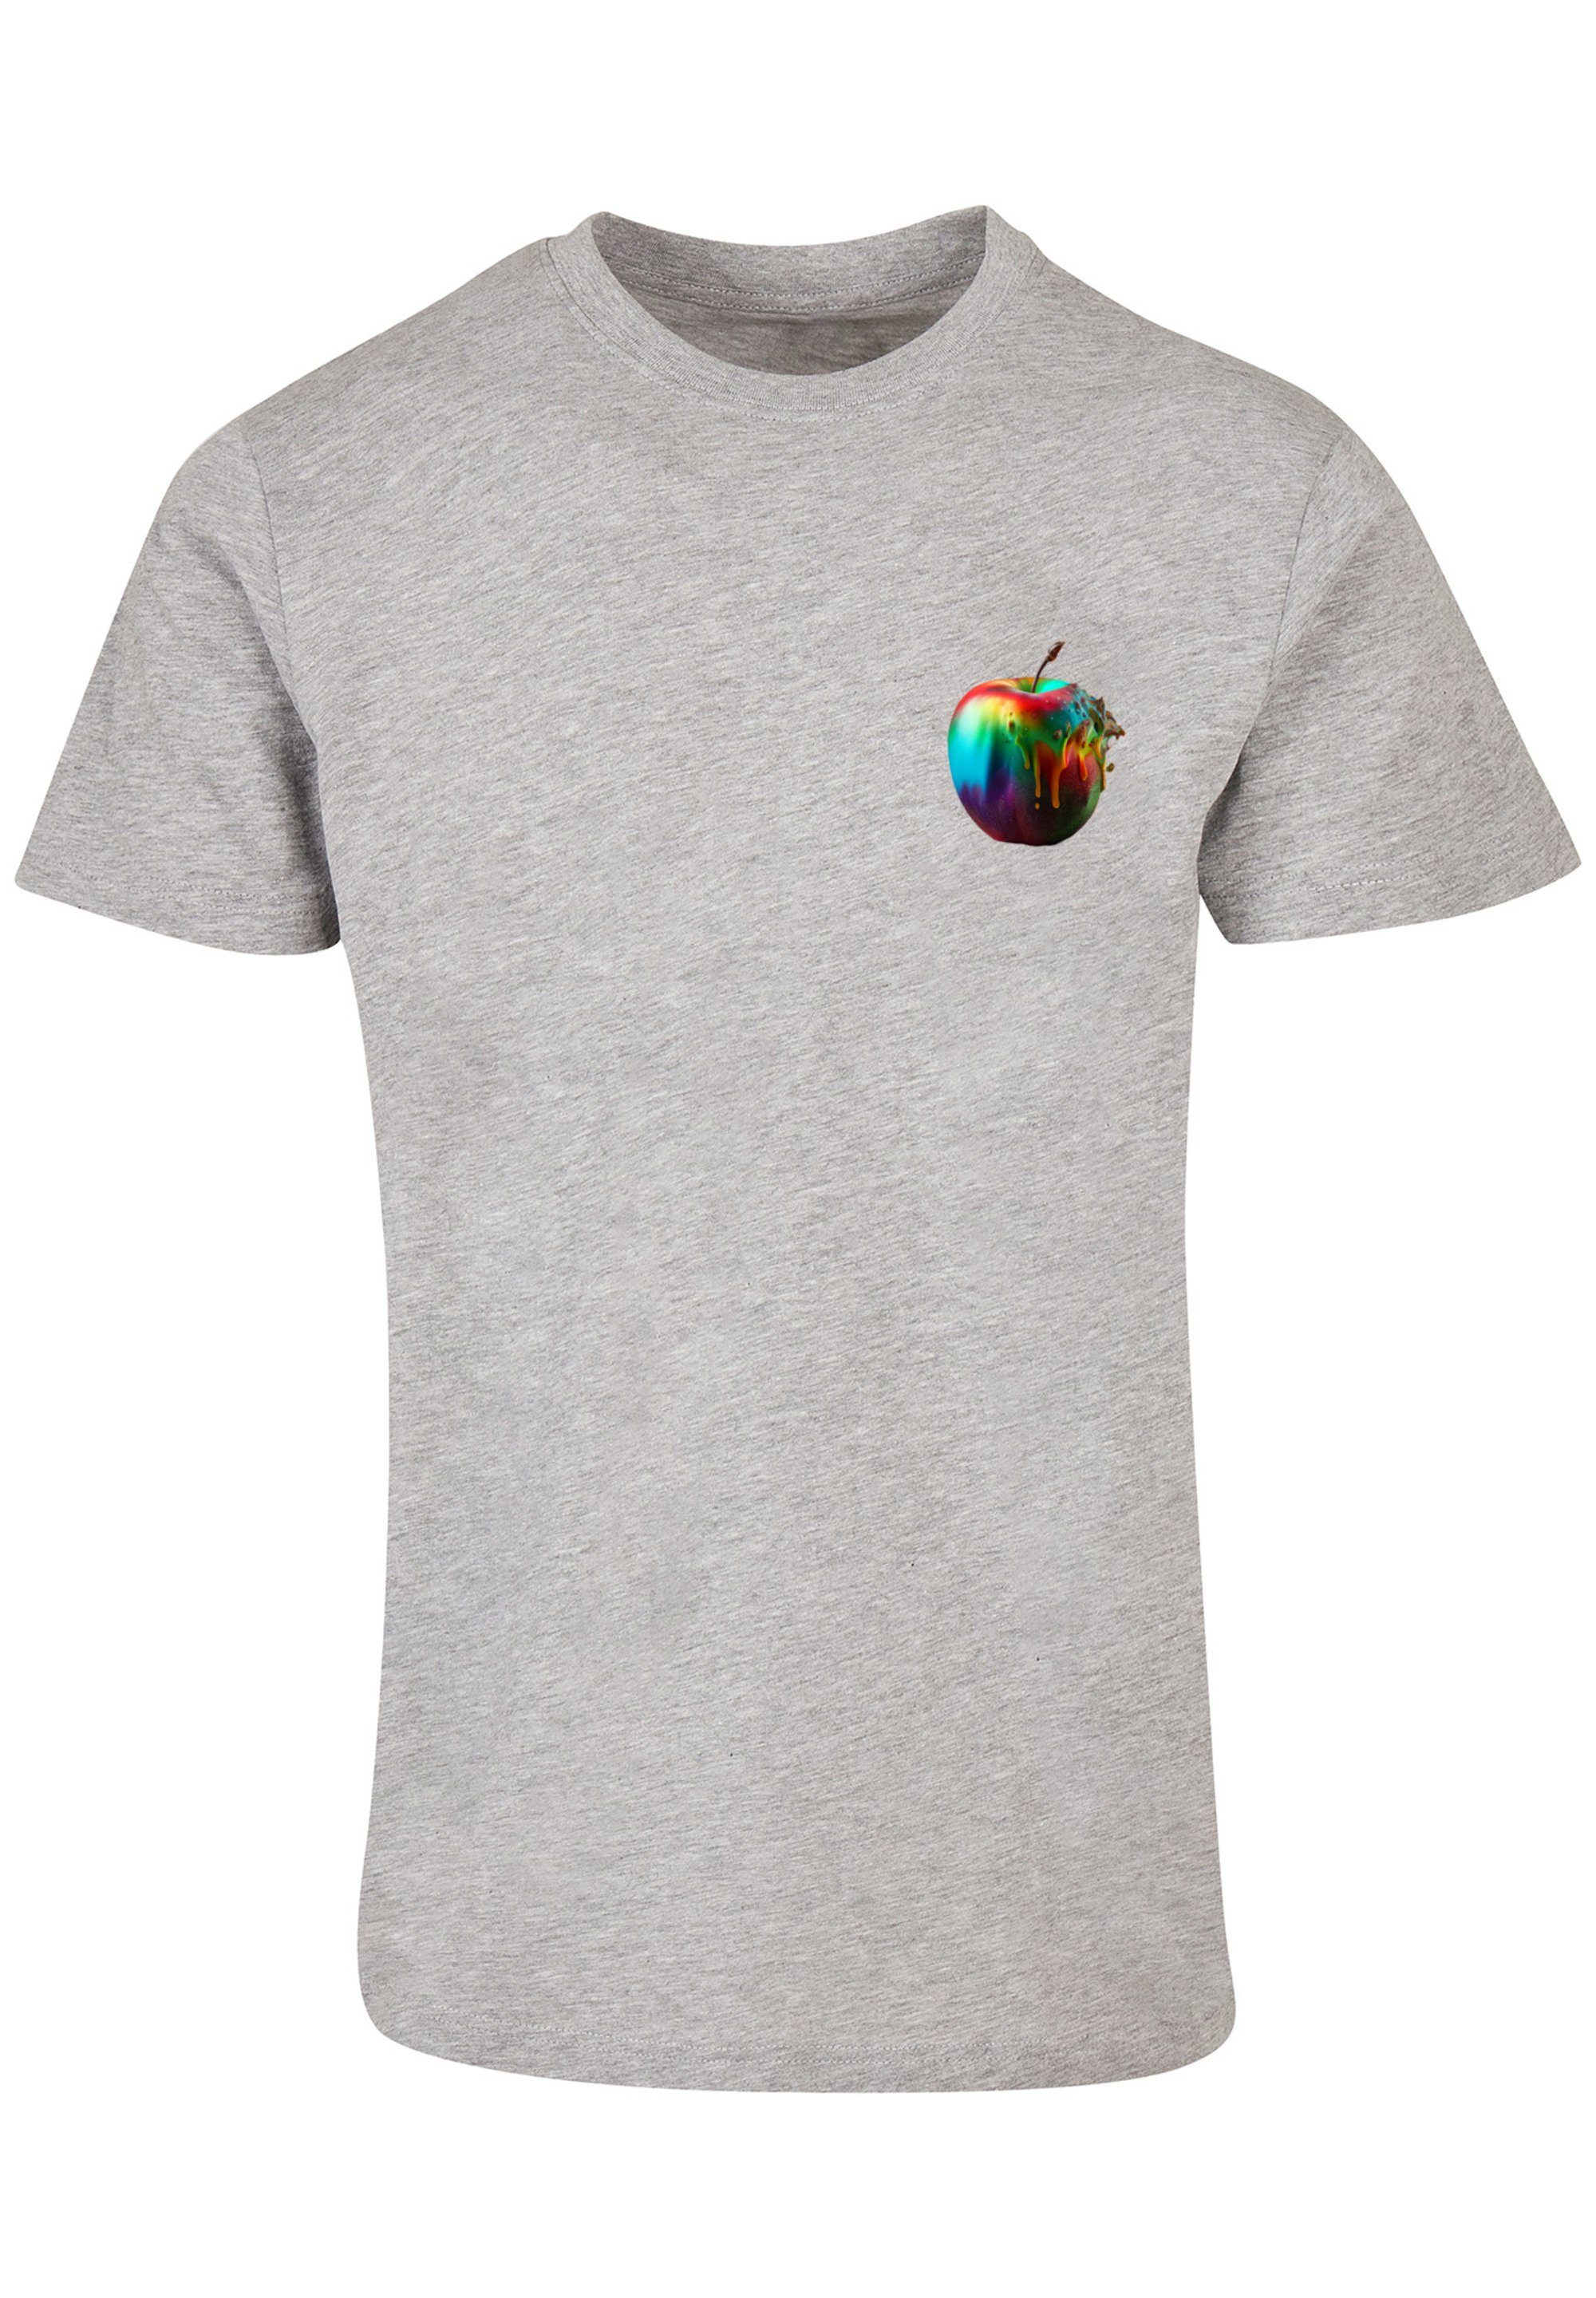 F4NT4STIC T-Shirt Rainbow heather grey - Collection Apple Colorfood Print